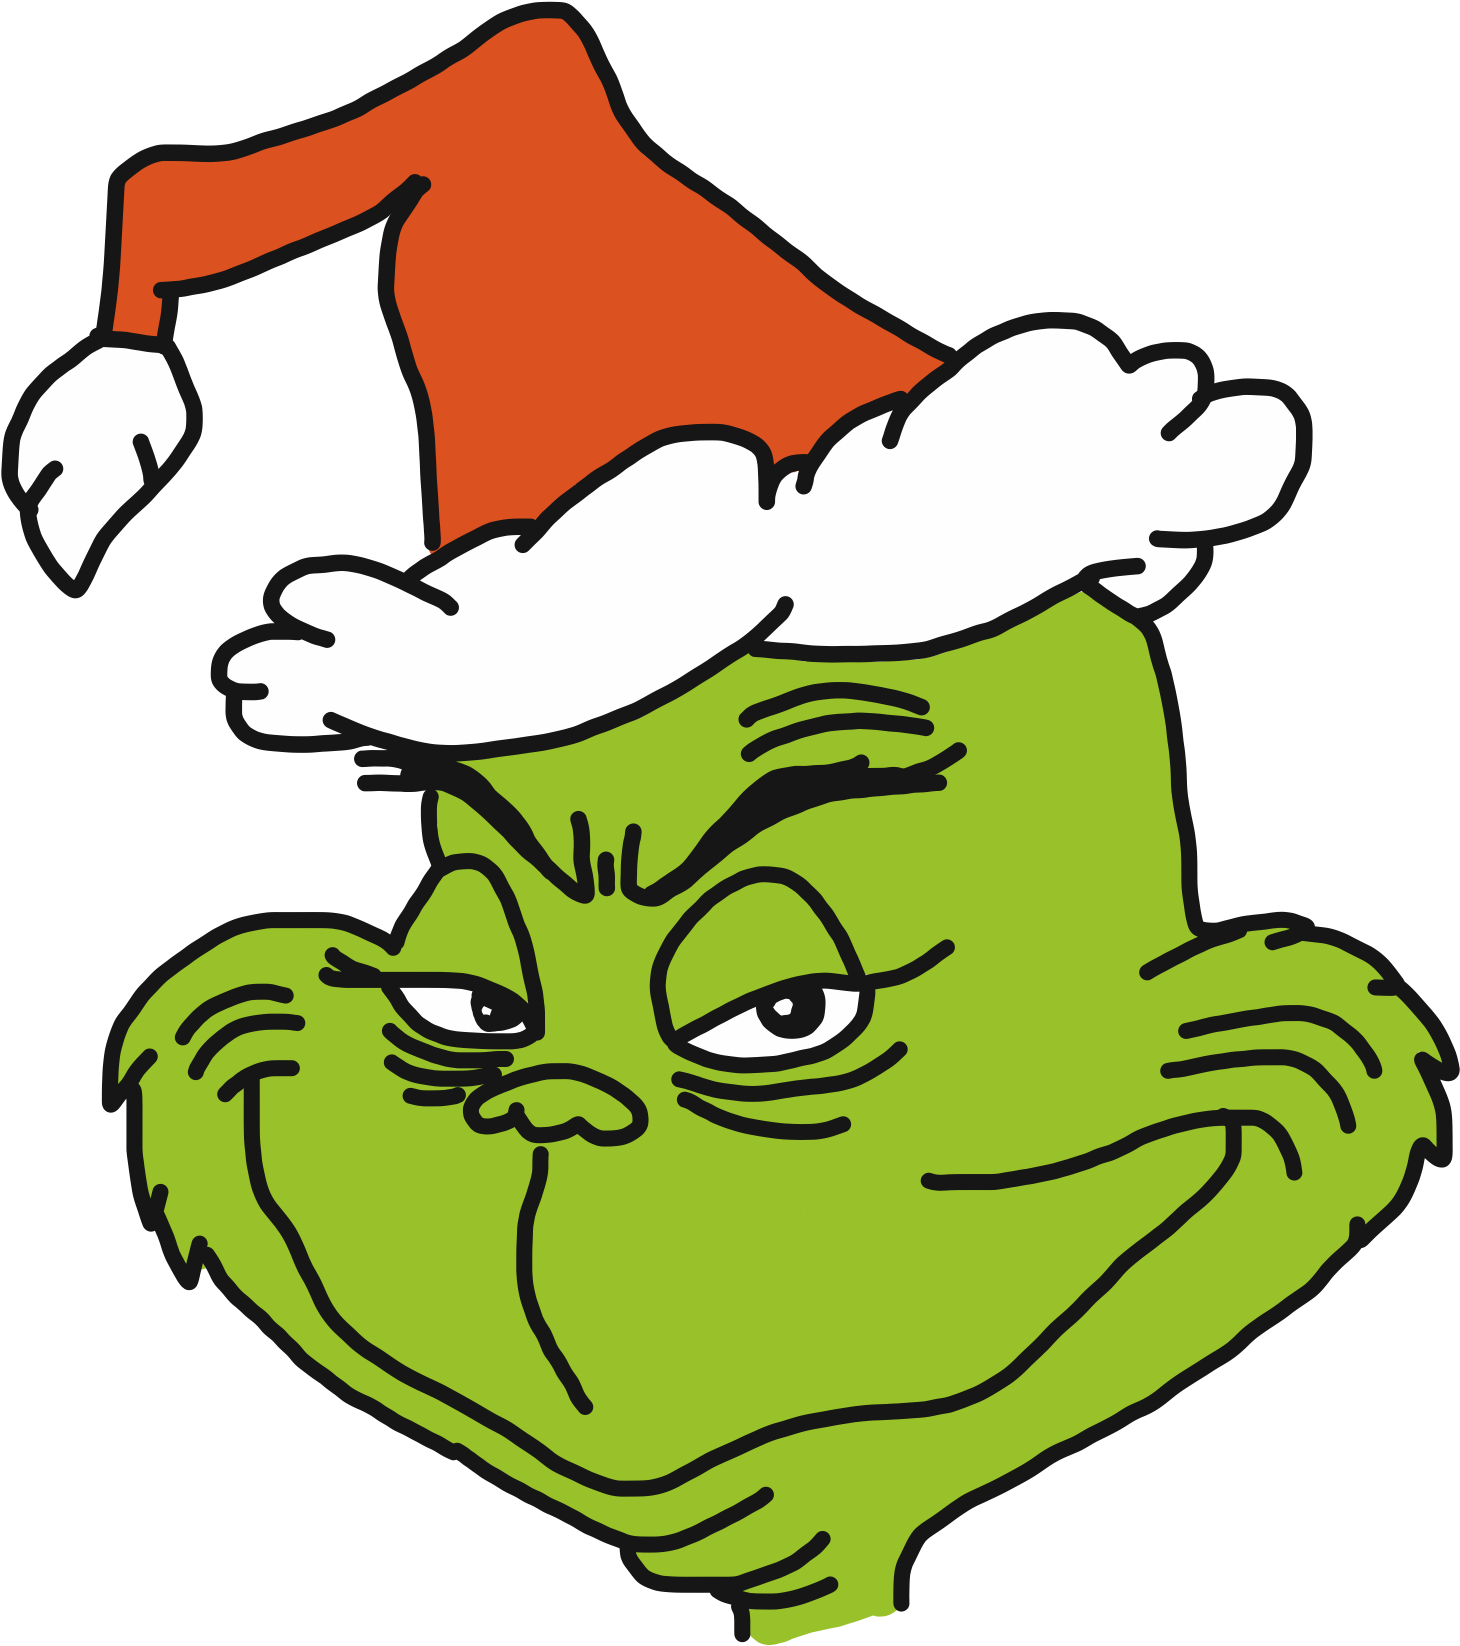 Reservations open for Brunch with The Grinch